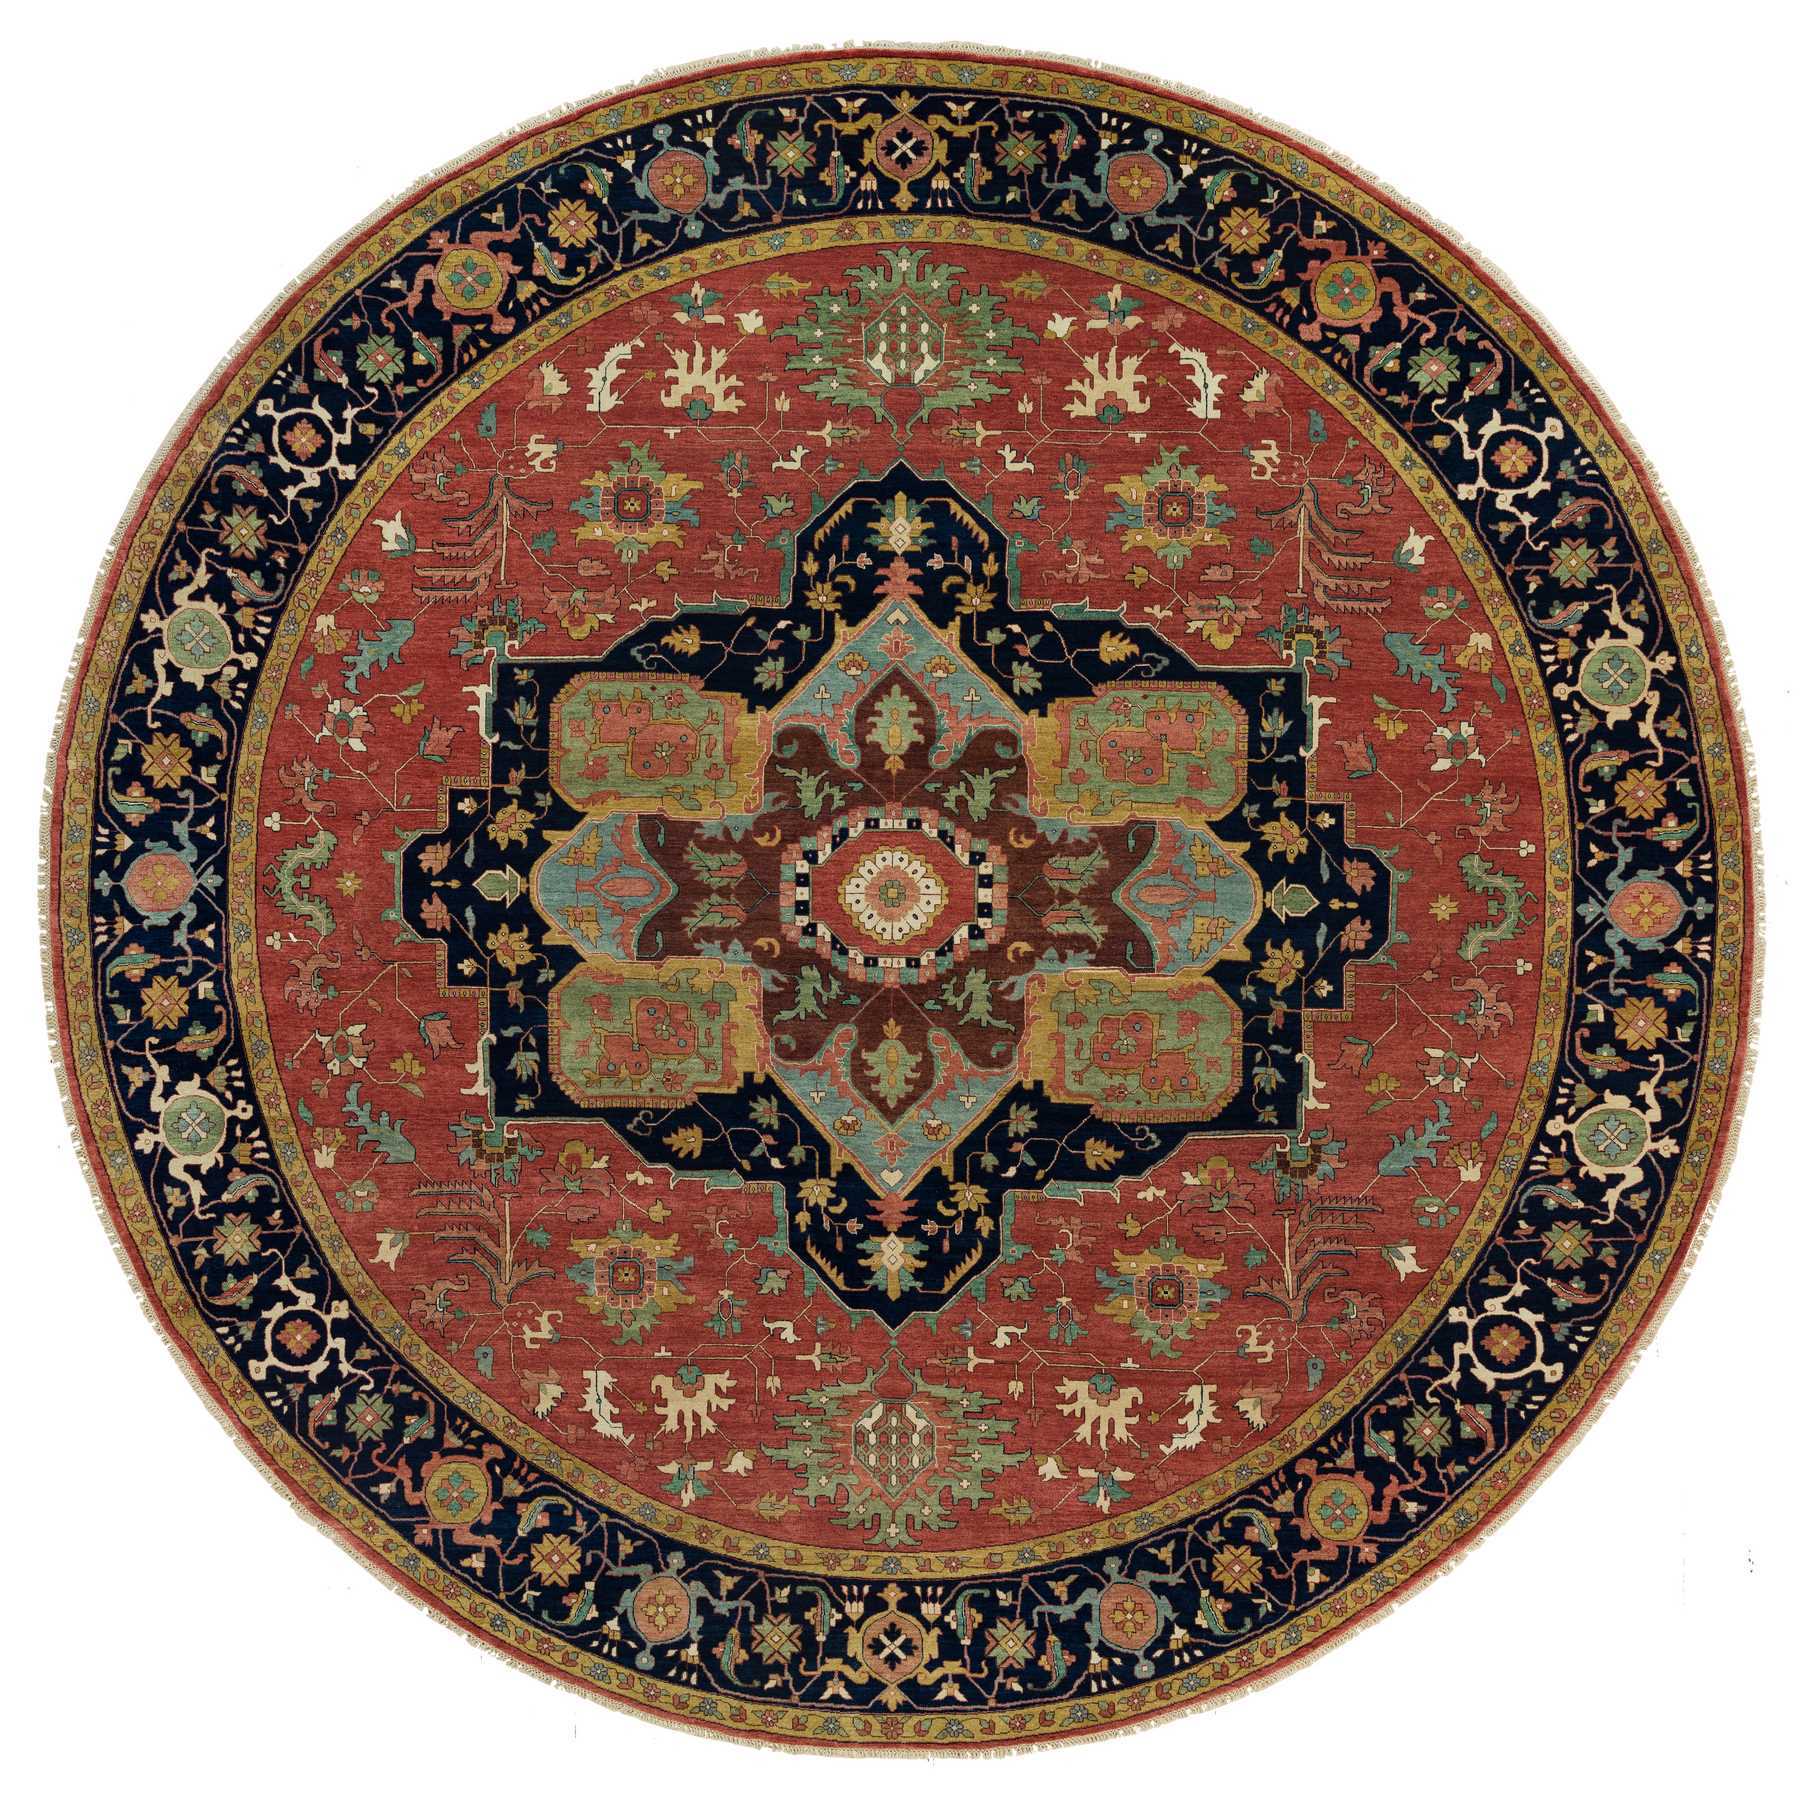  Wool Hand-Knotted Area Rug 13'11